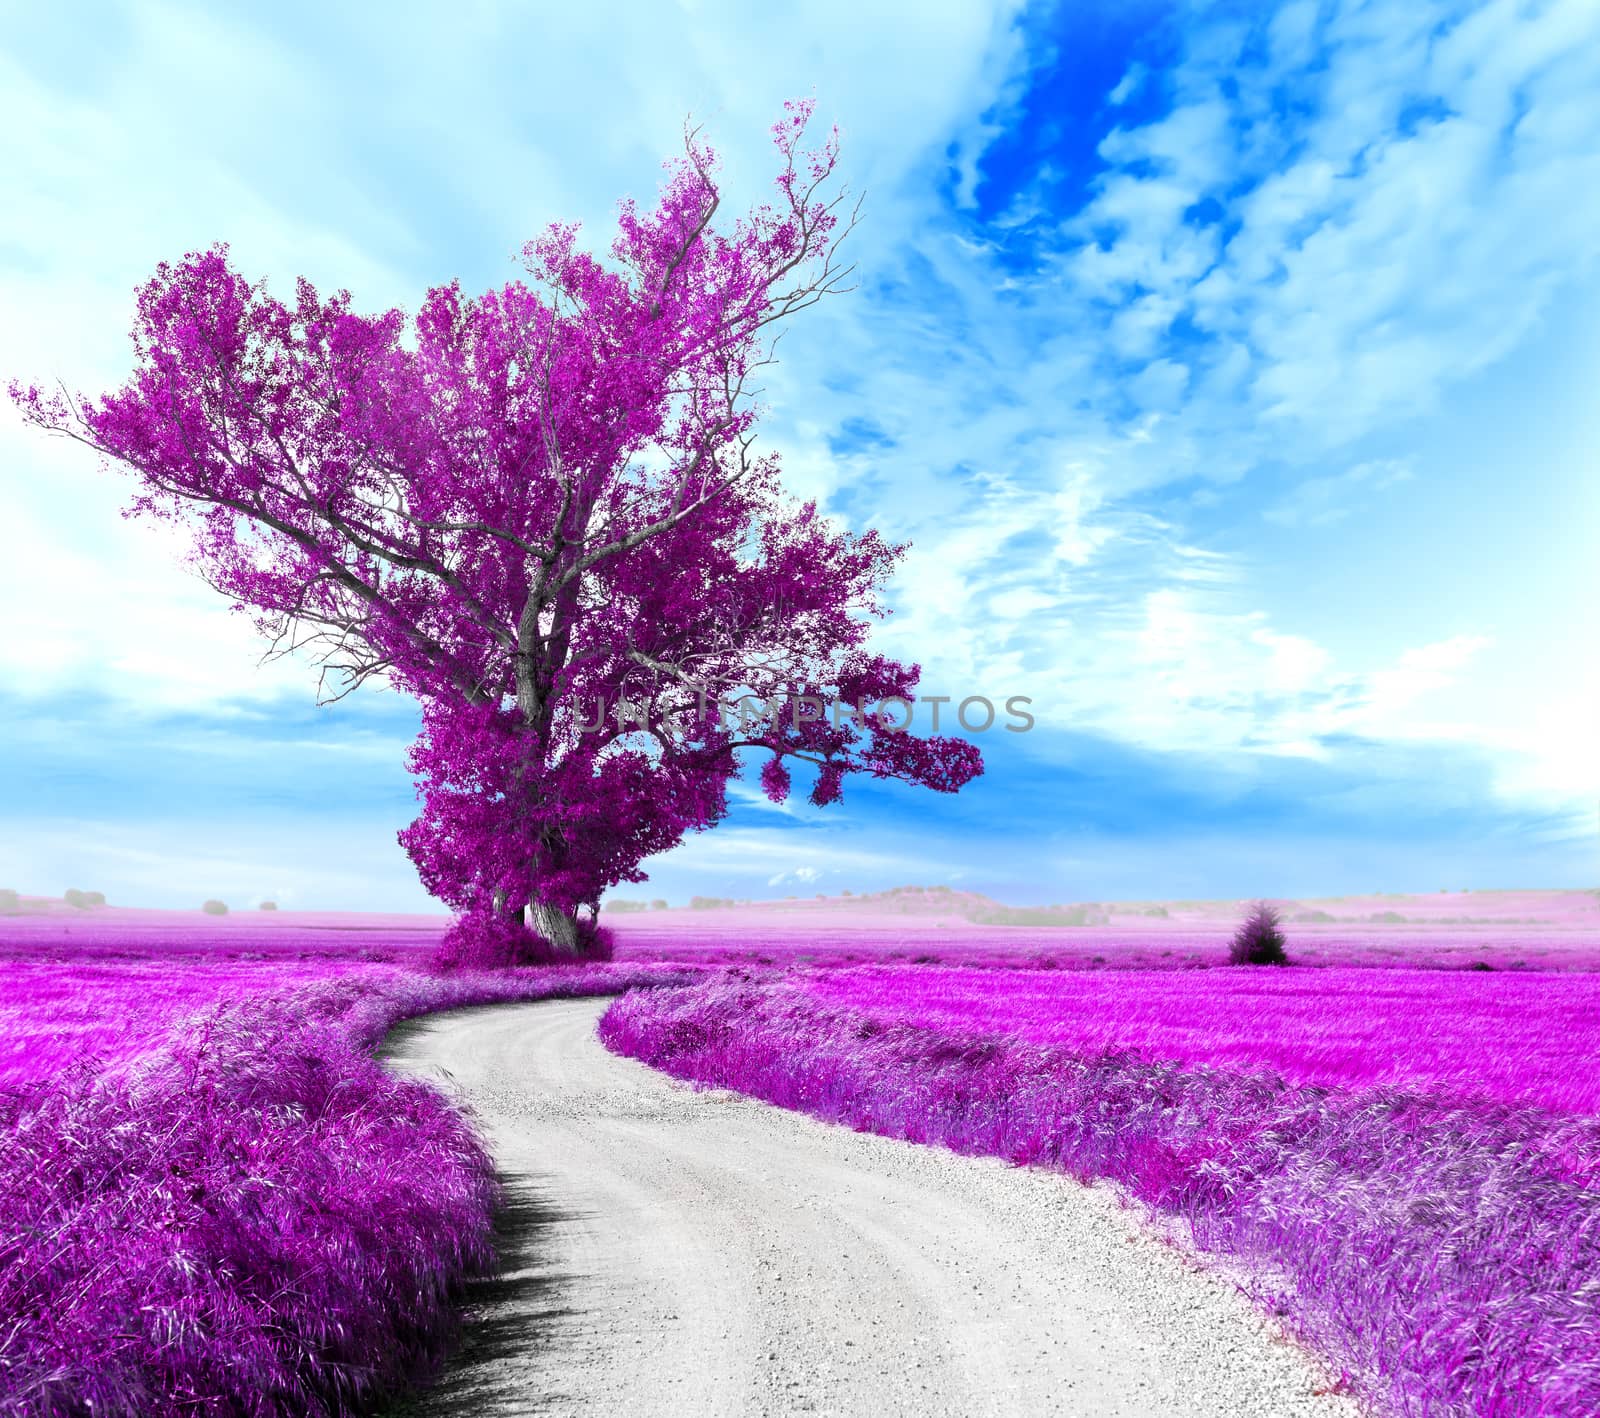 Surreal tree and dreamscape.Road through the fields